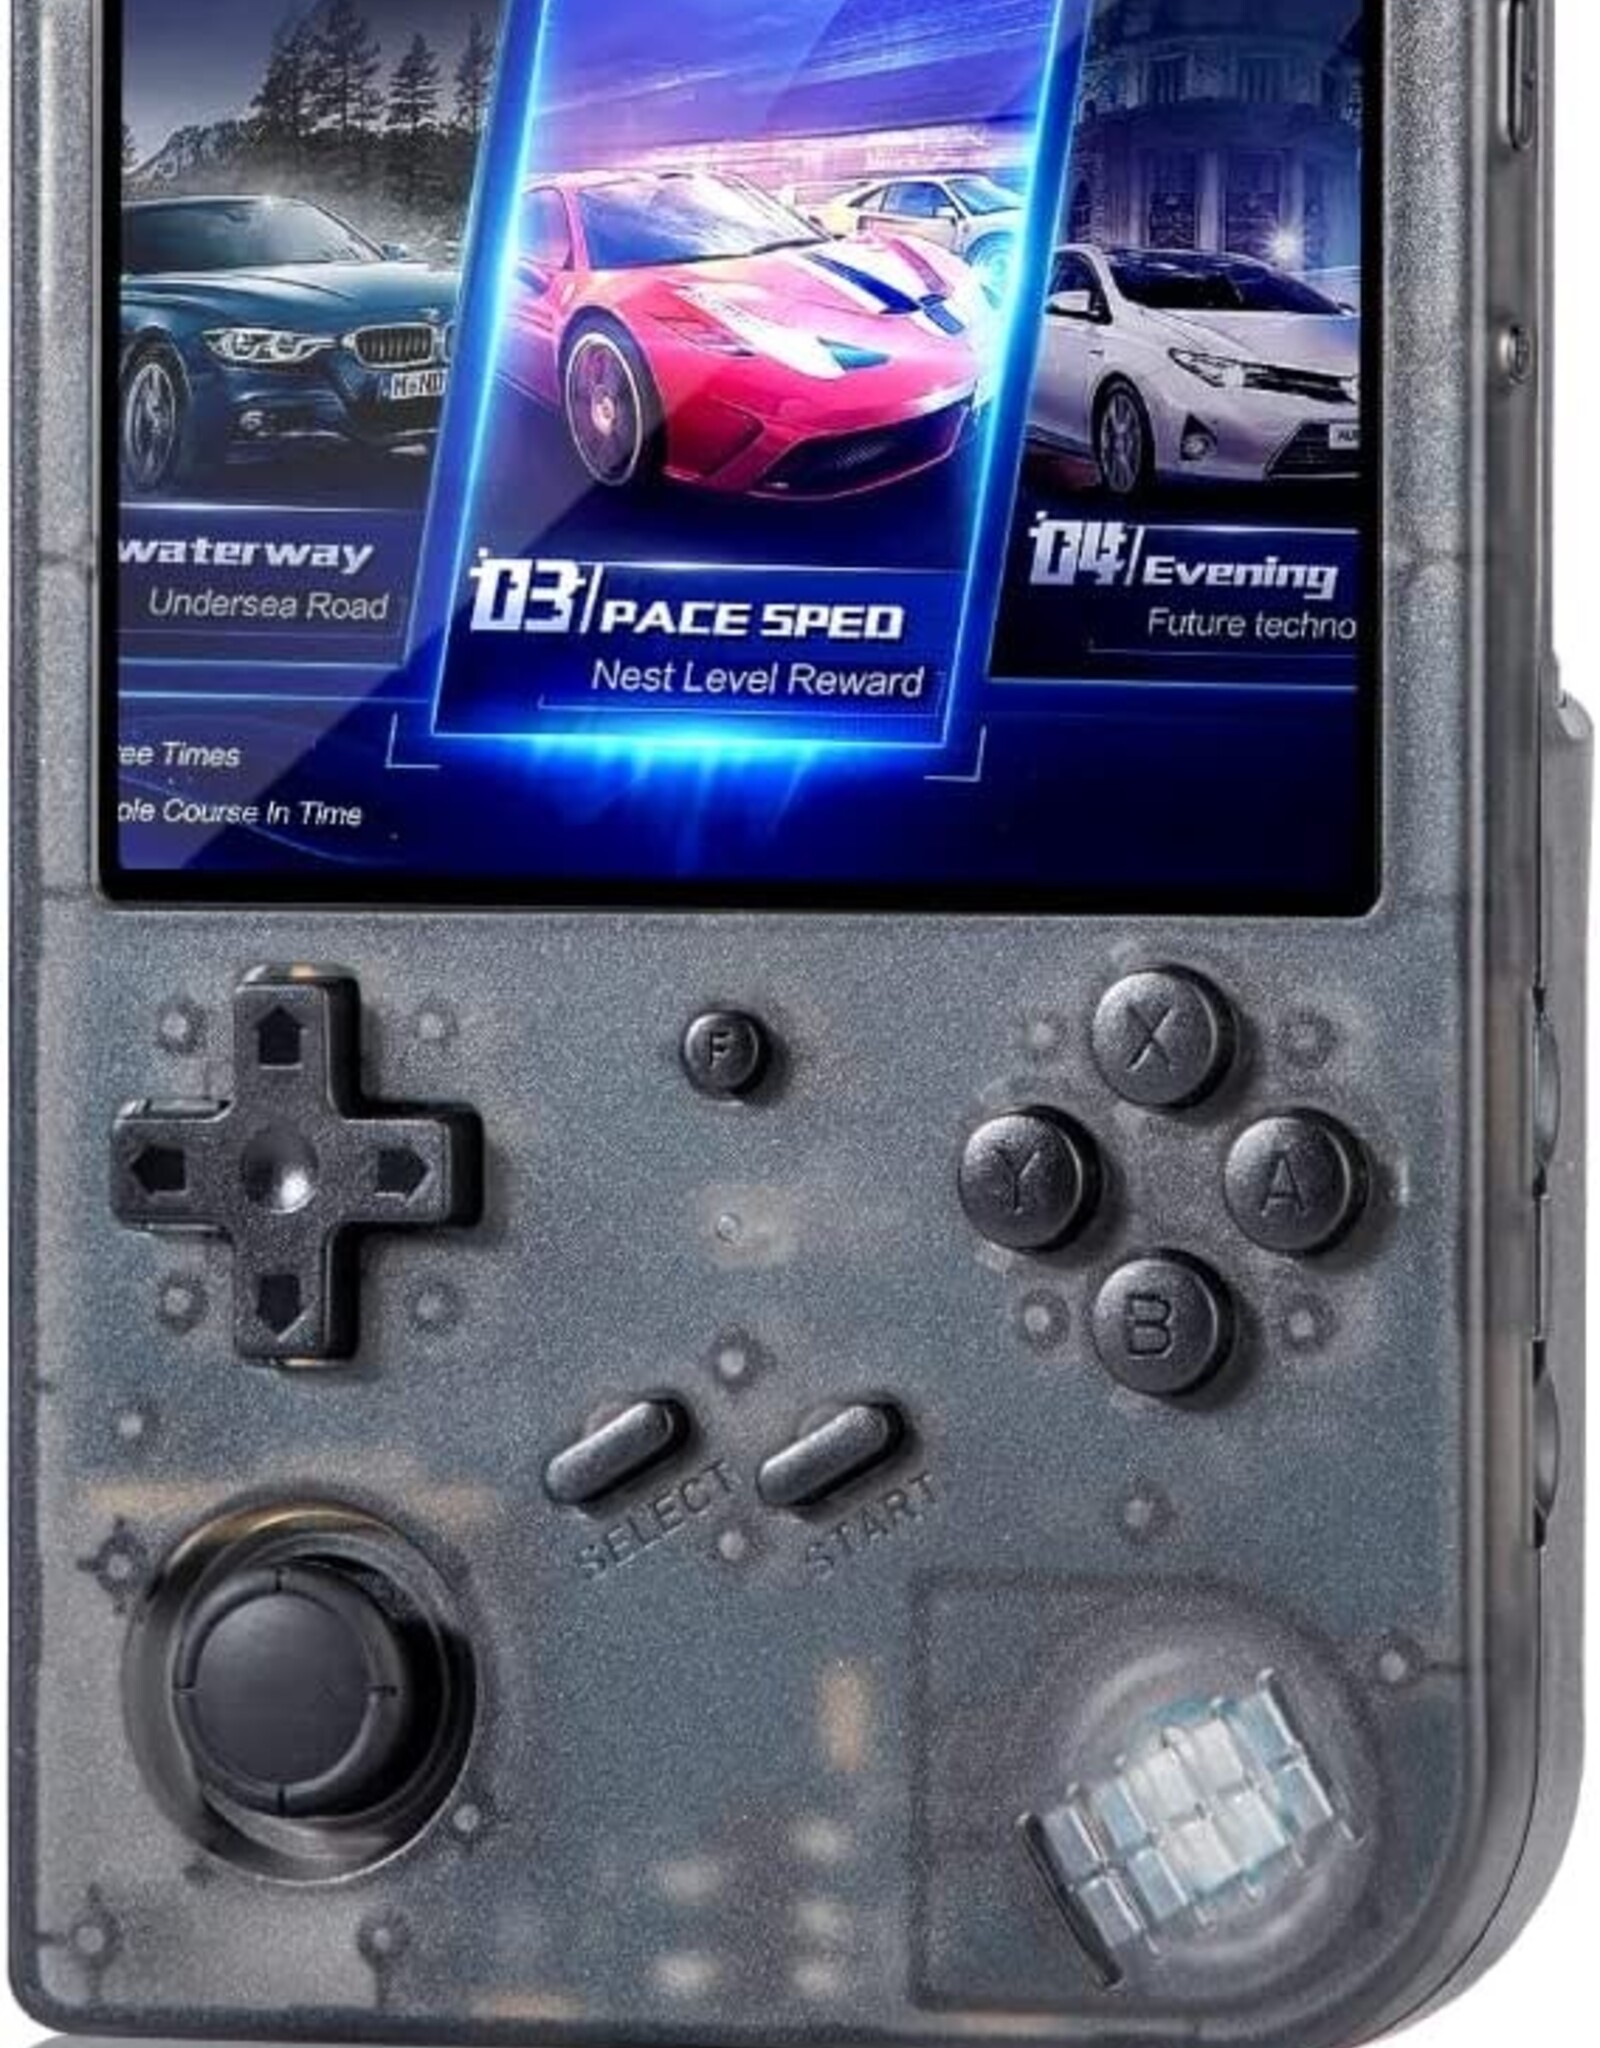 Transparent Black 256GB RG353V Handheld Game Console , Dual OS Android 11 and Linux System Support 5G WiFi 4.2 Bluetooth Moonlight Streaming HDMI Output Built-in 256G SD Card 4452 Games (RG353V-Transparent Black)